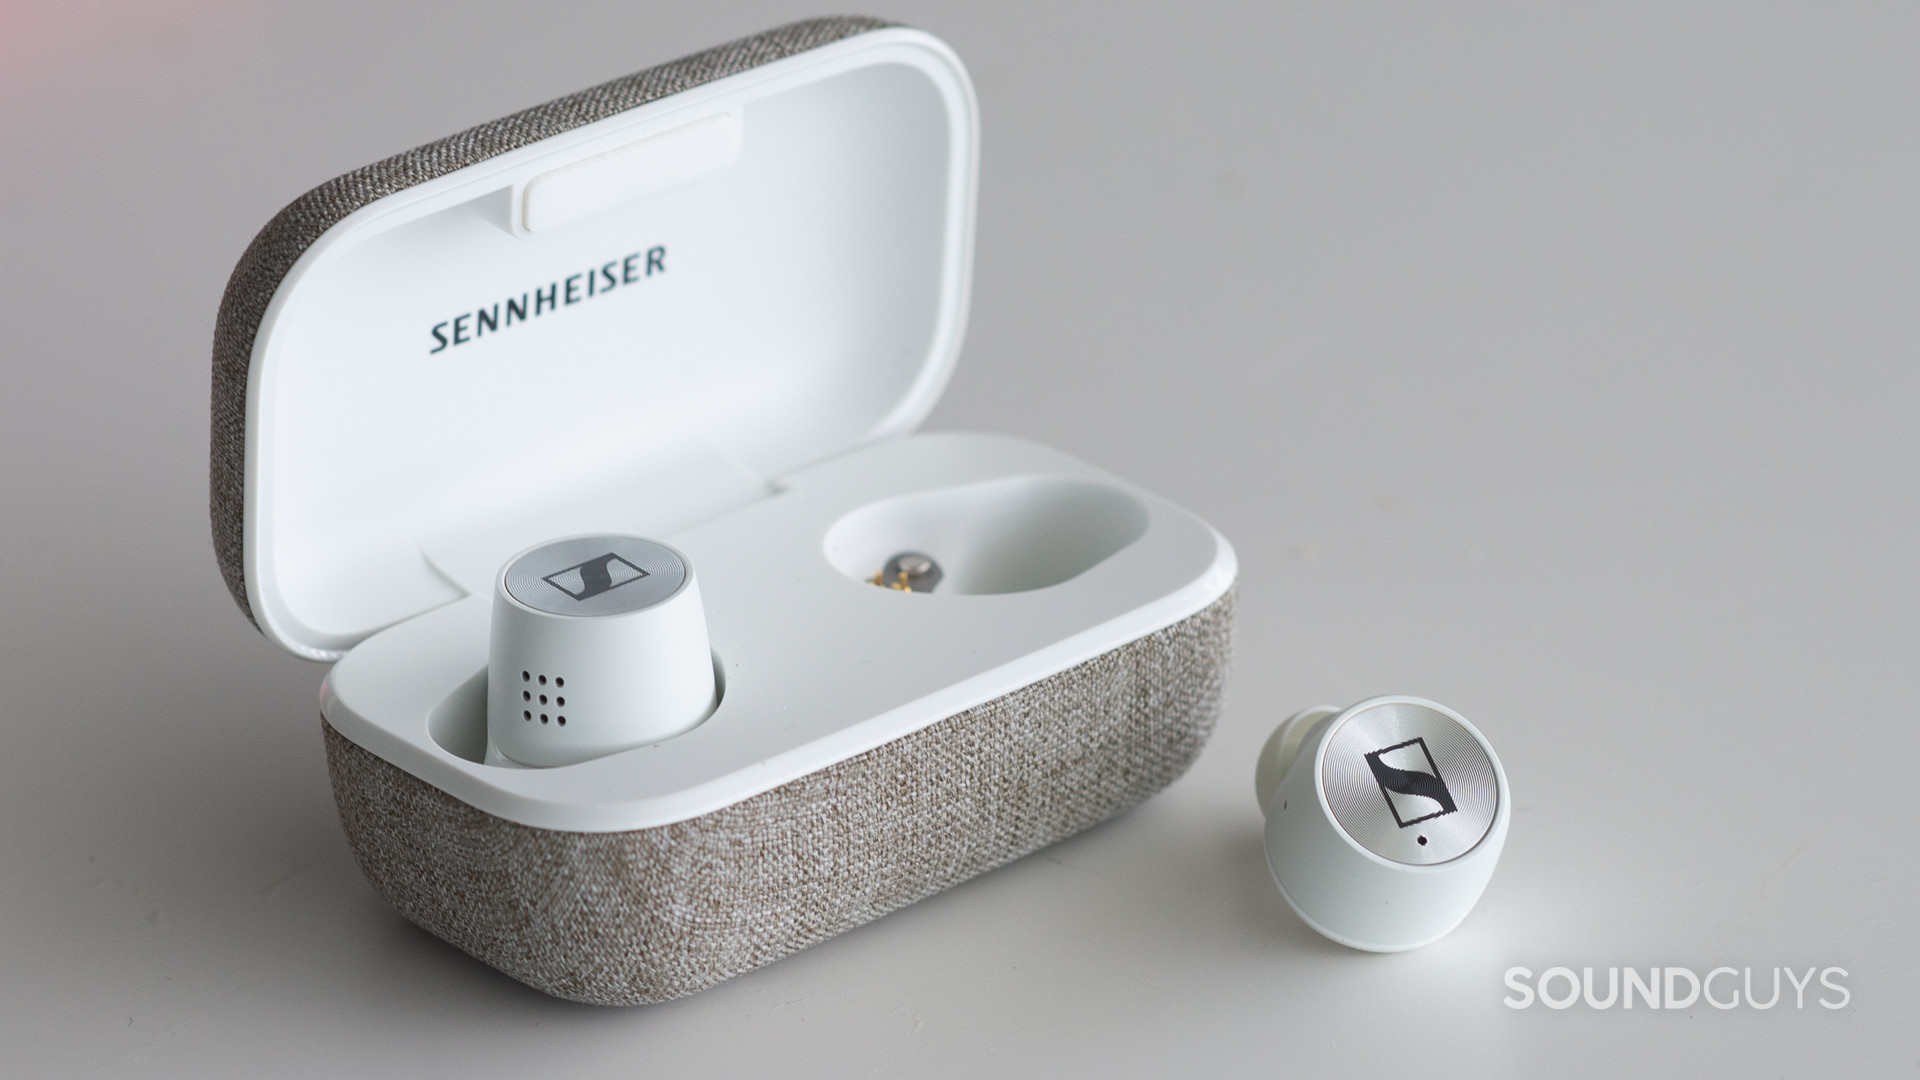 One of the Sennheiser MOMENTUM True Wireless 2 earbuds rests outside of the open charging case, while the other remains inside.